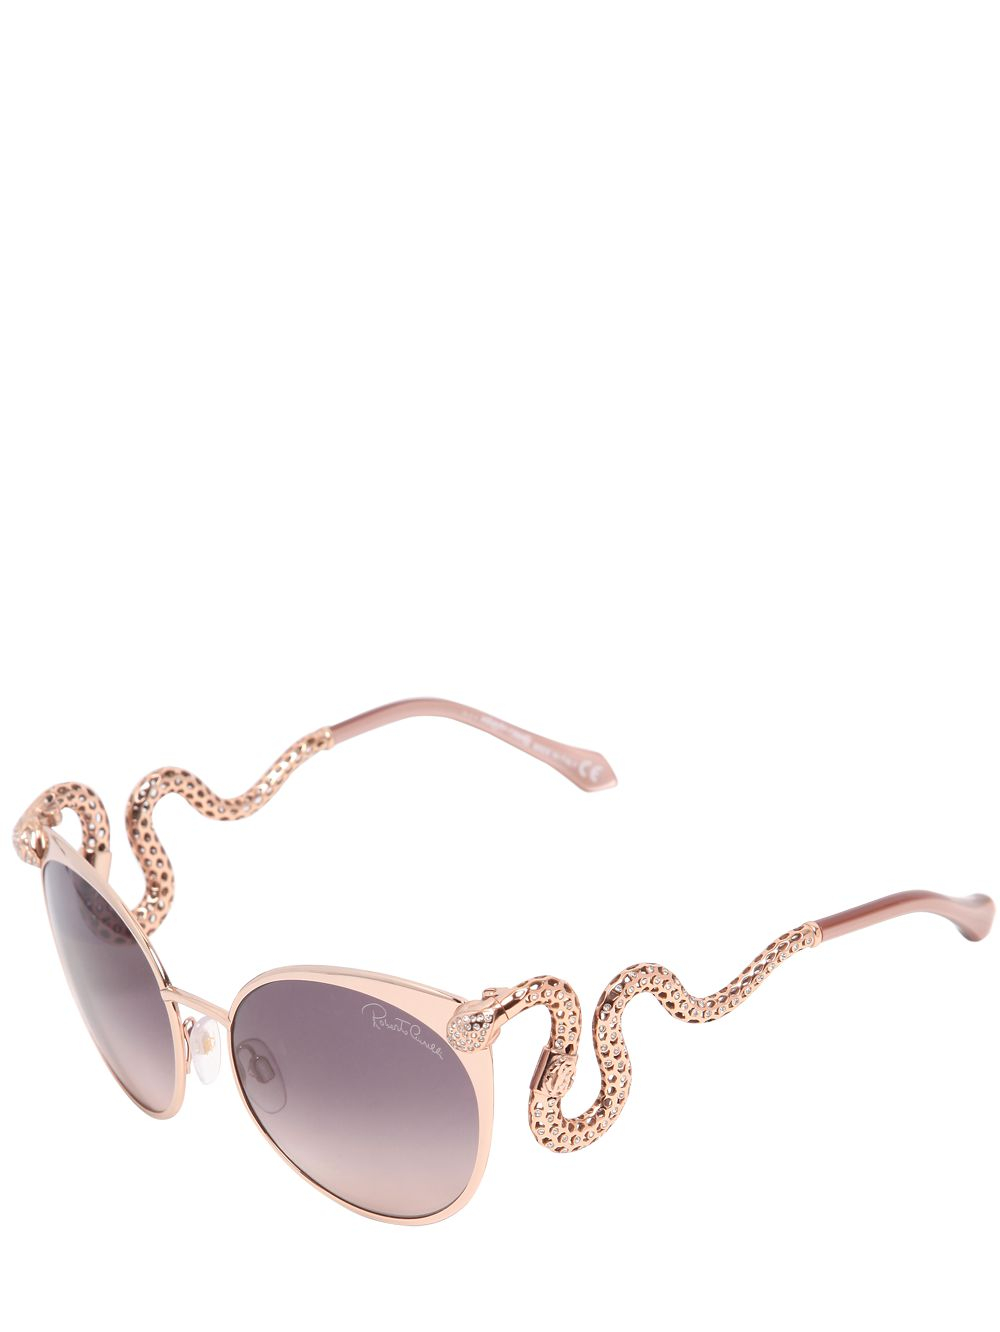 roberto cavalli gold cat eye sunglasses with serpent temples product 1 26451430 2 666538307 normal